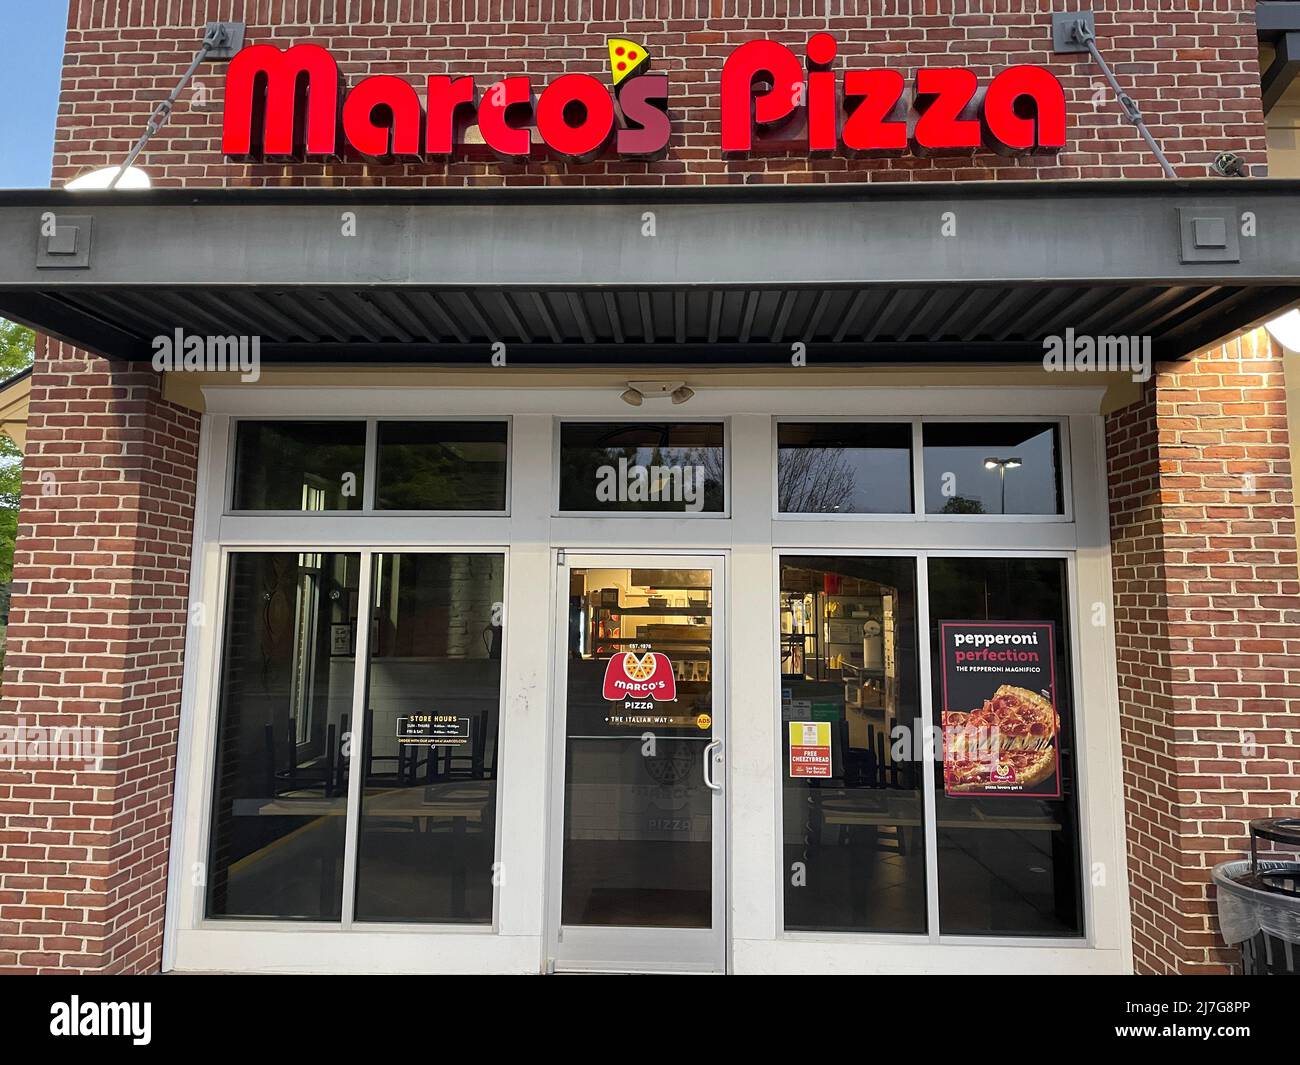 Augusta, Ga USA - 04 27 22: Marcos pizza restaurant sign and entrance Stock Photo